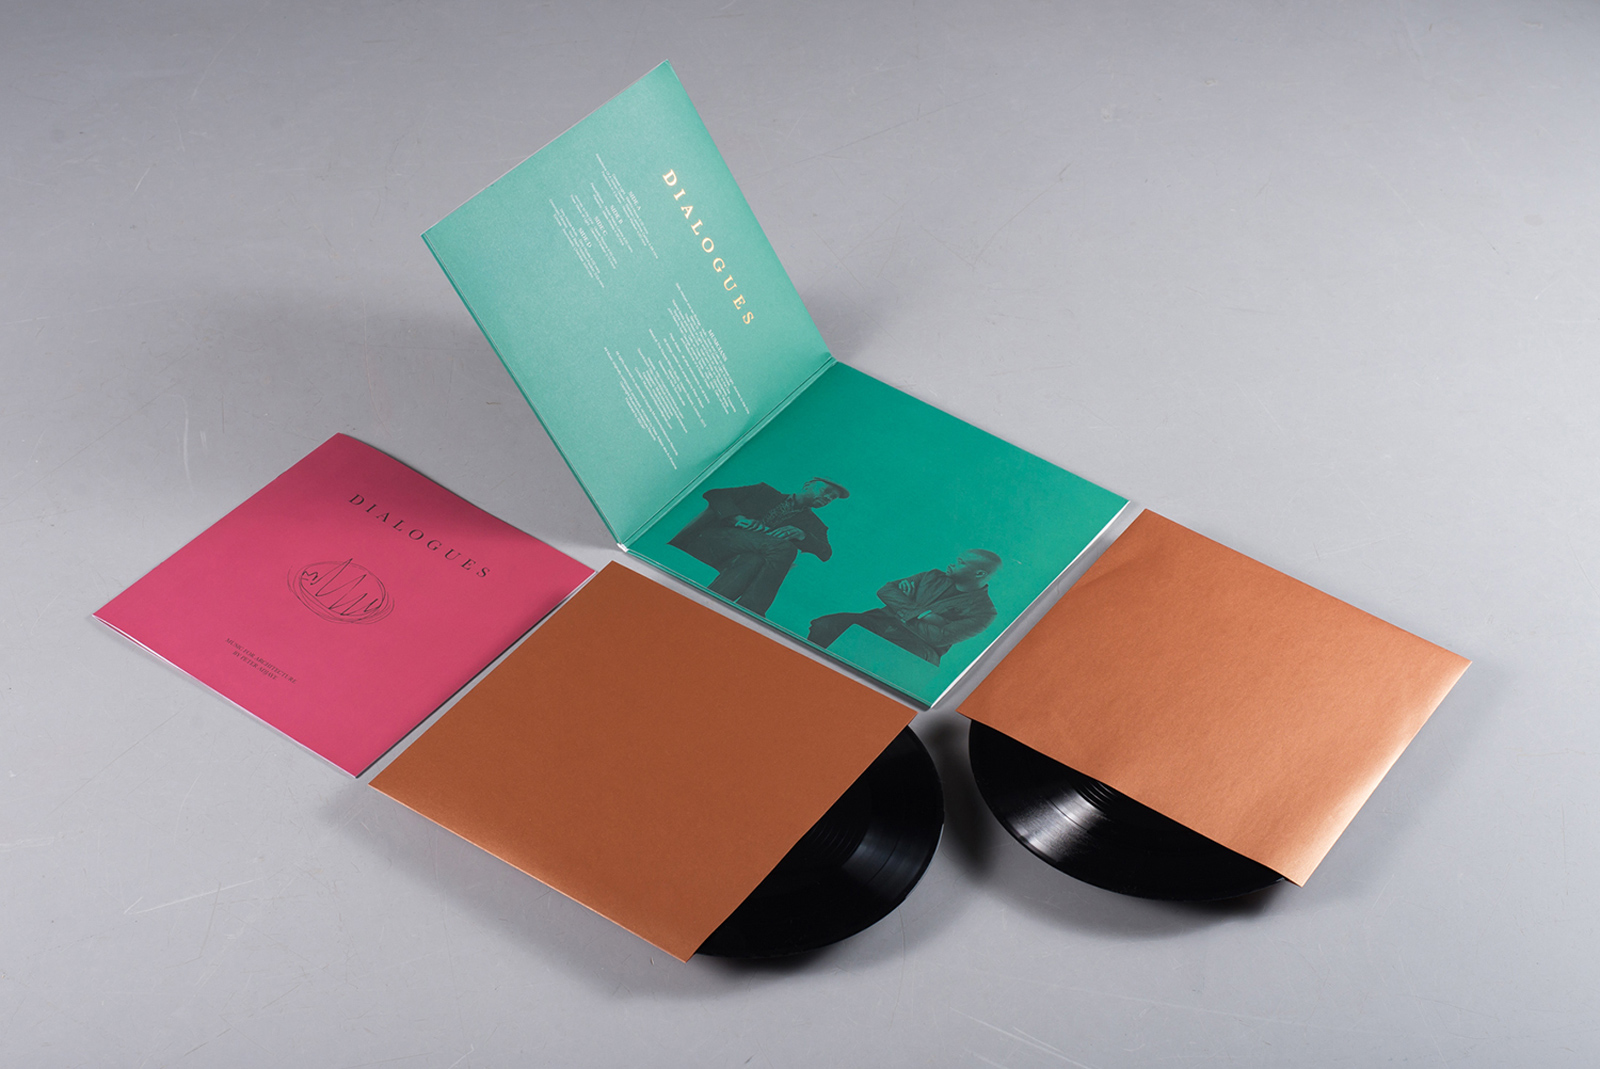 Dialogues vinyl, from VF Editions by Peter Adjaye